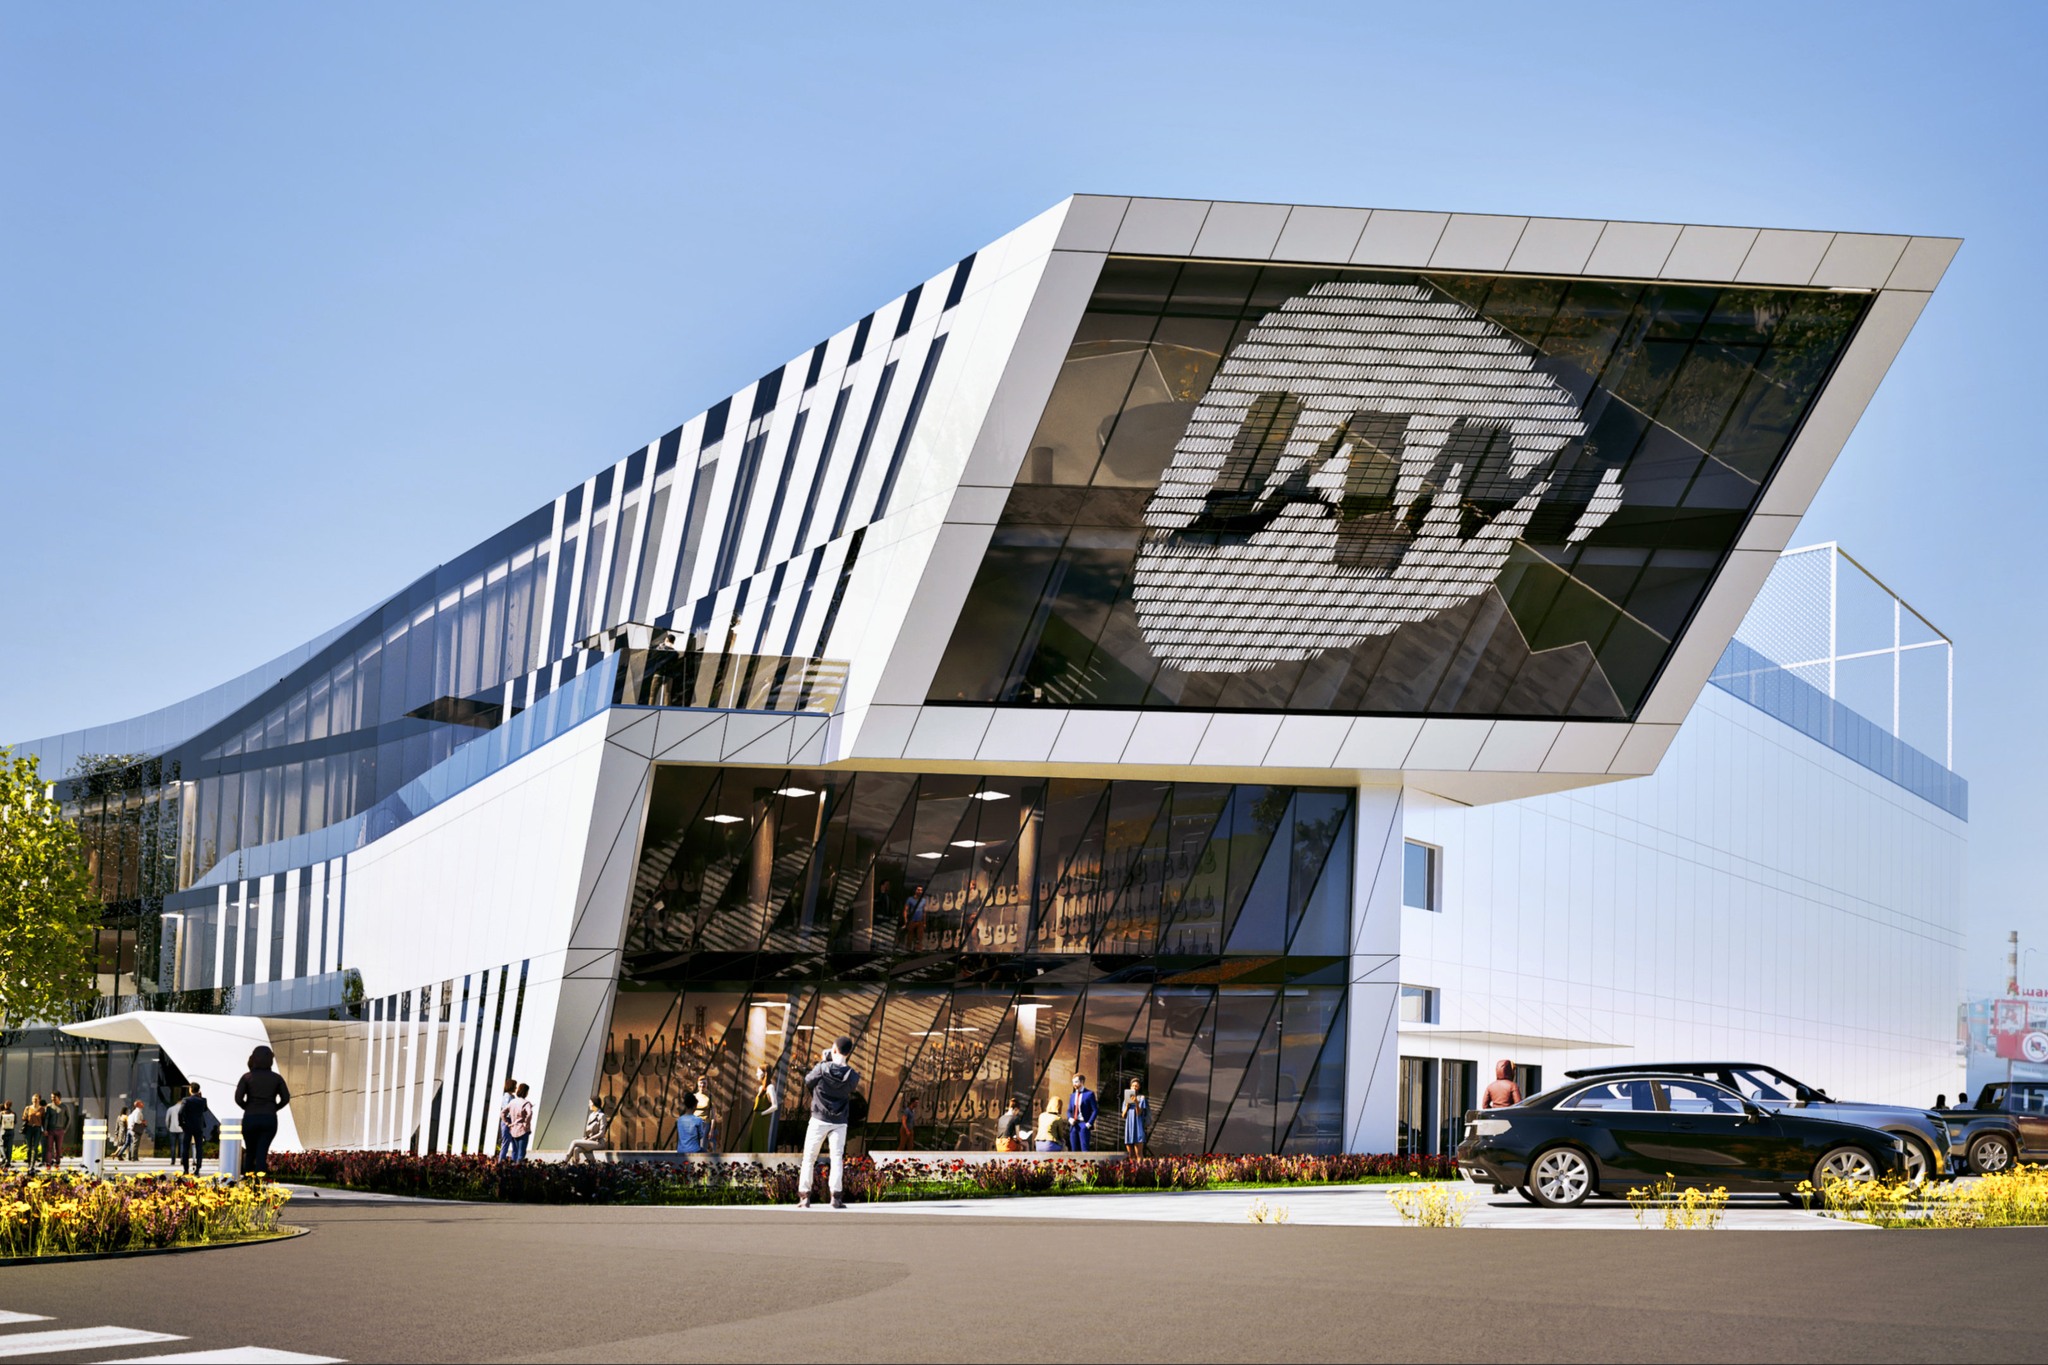 Architects from Aranchii Architects have designed the headquarters of the company Jam in Kyiv